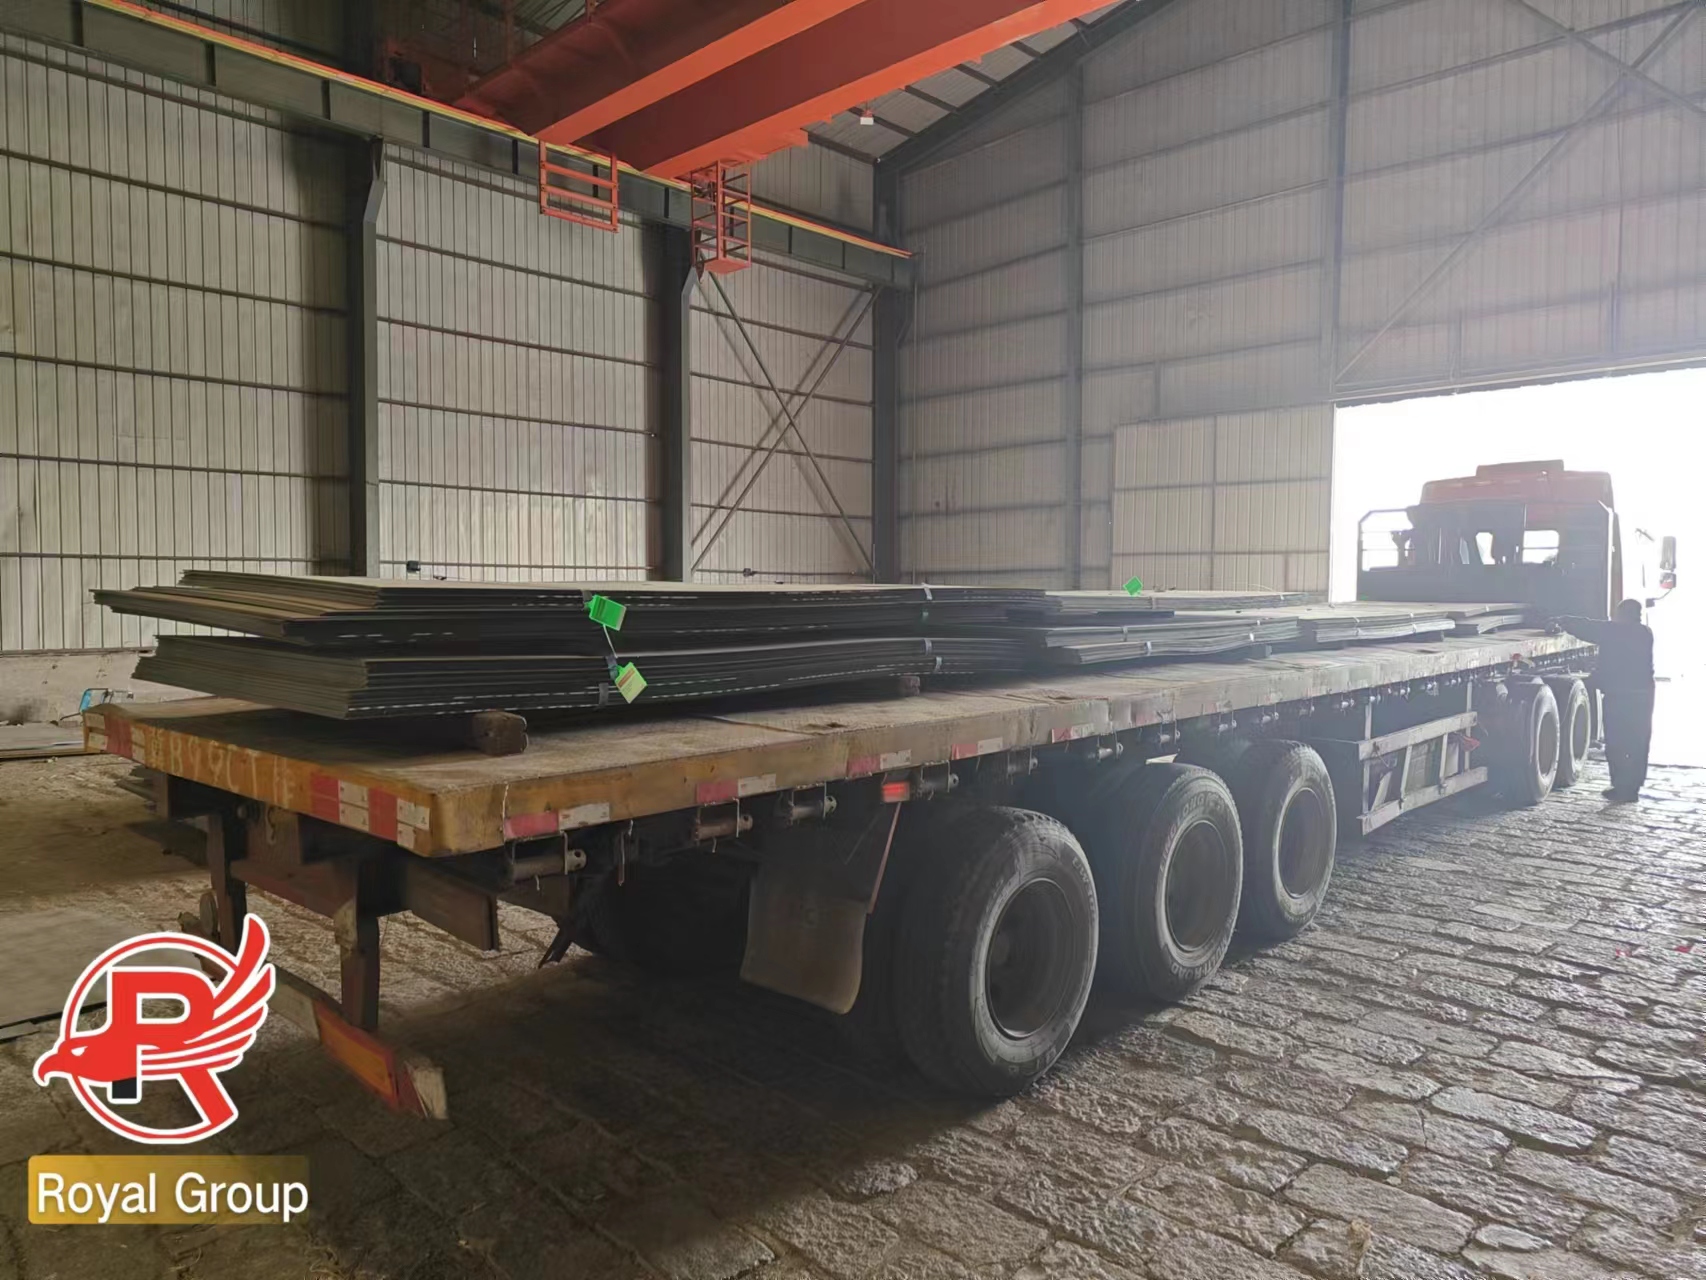 Carbon steel plates shipped to Australia Boosting Trade and Economic Relations (1)